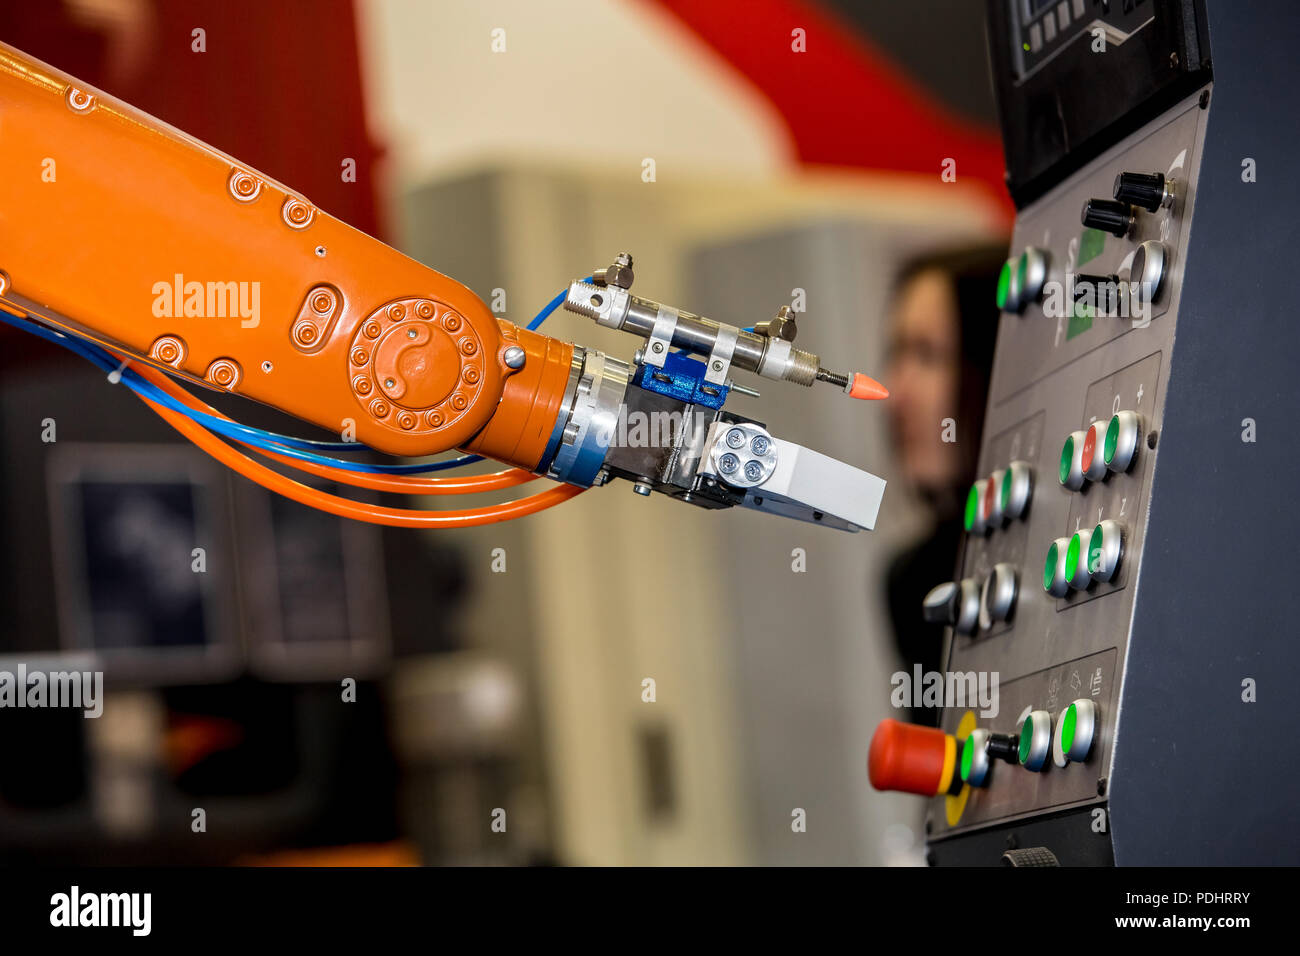 Robot arm pushing the buttons on control panel of CNC machine Stock Photo